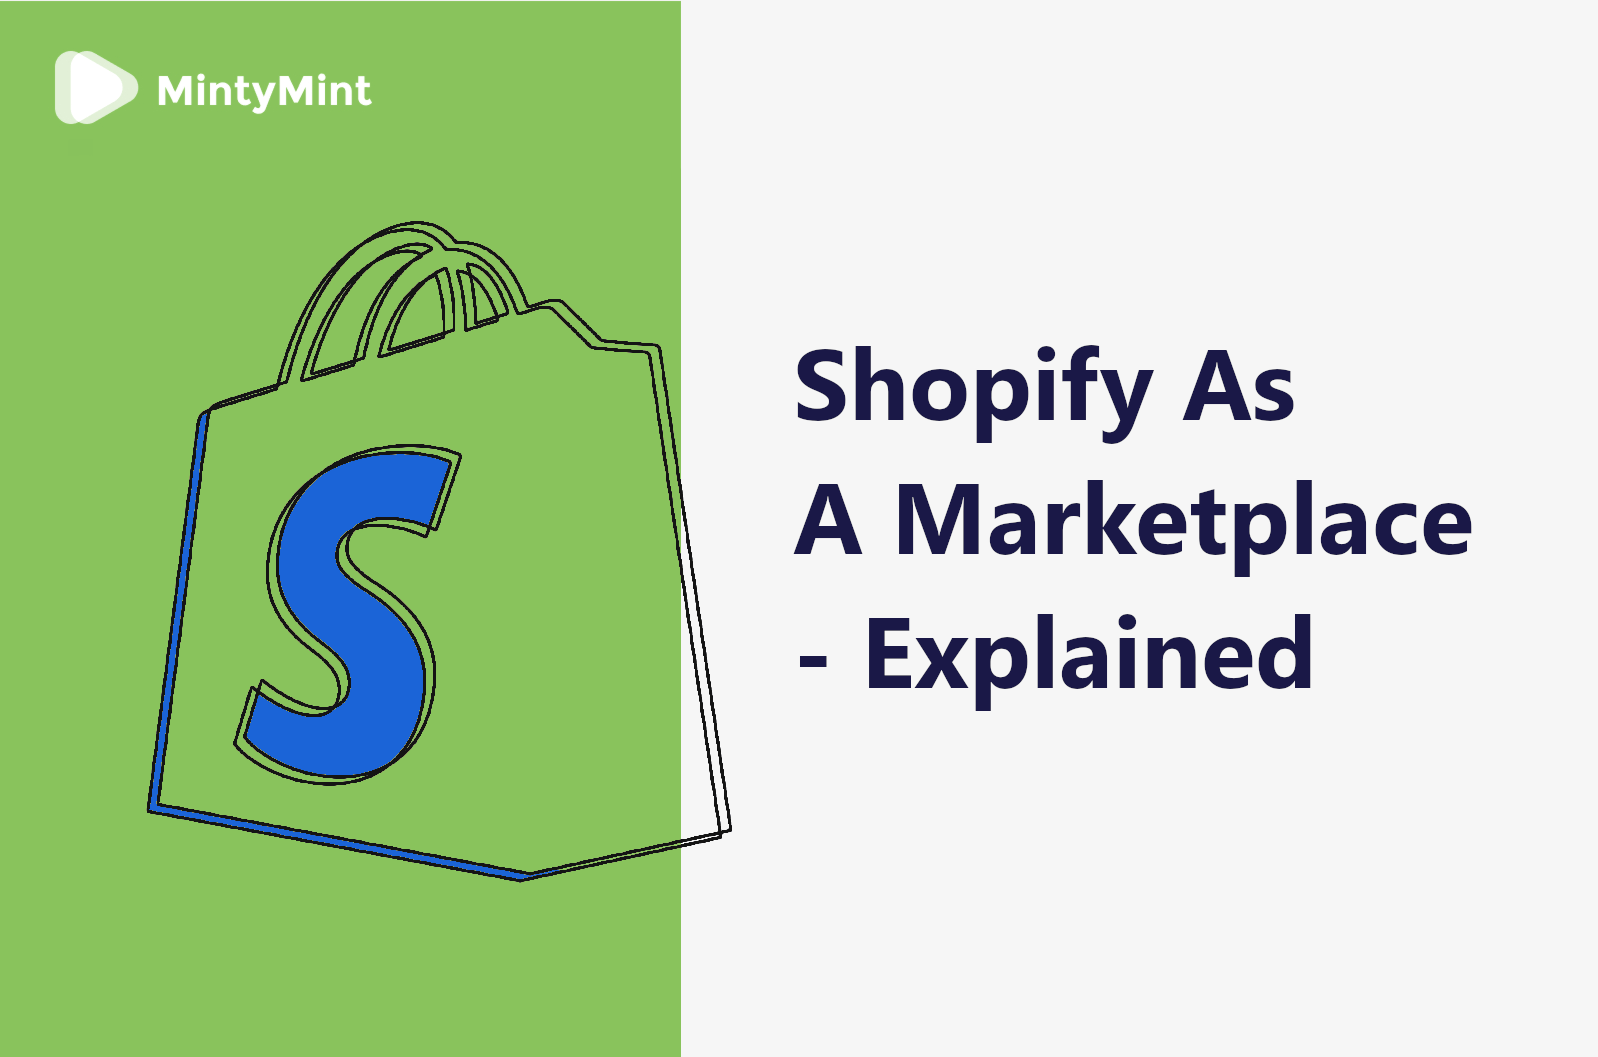 Shopify as a market place - explained